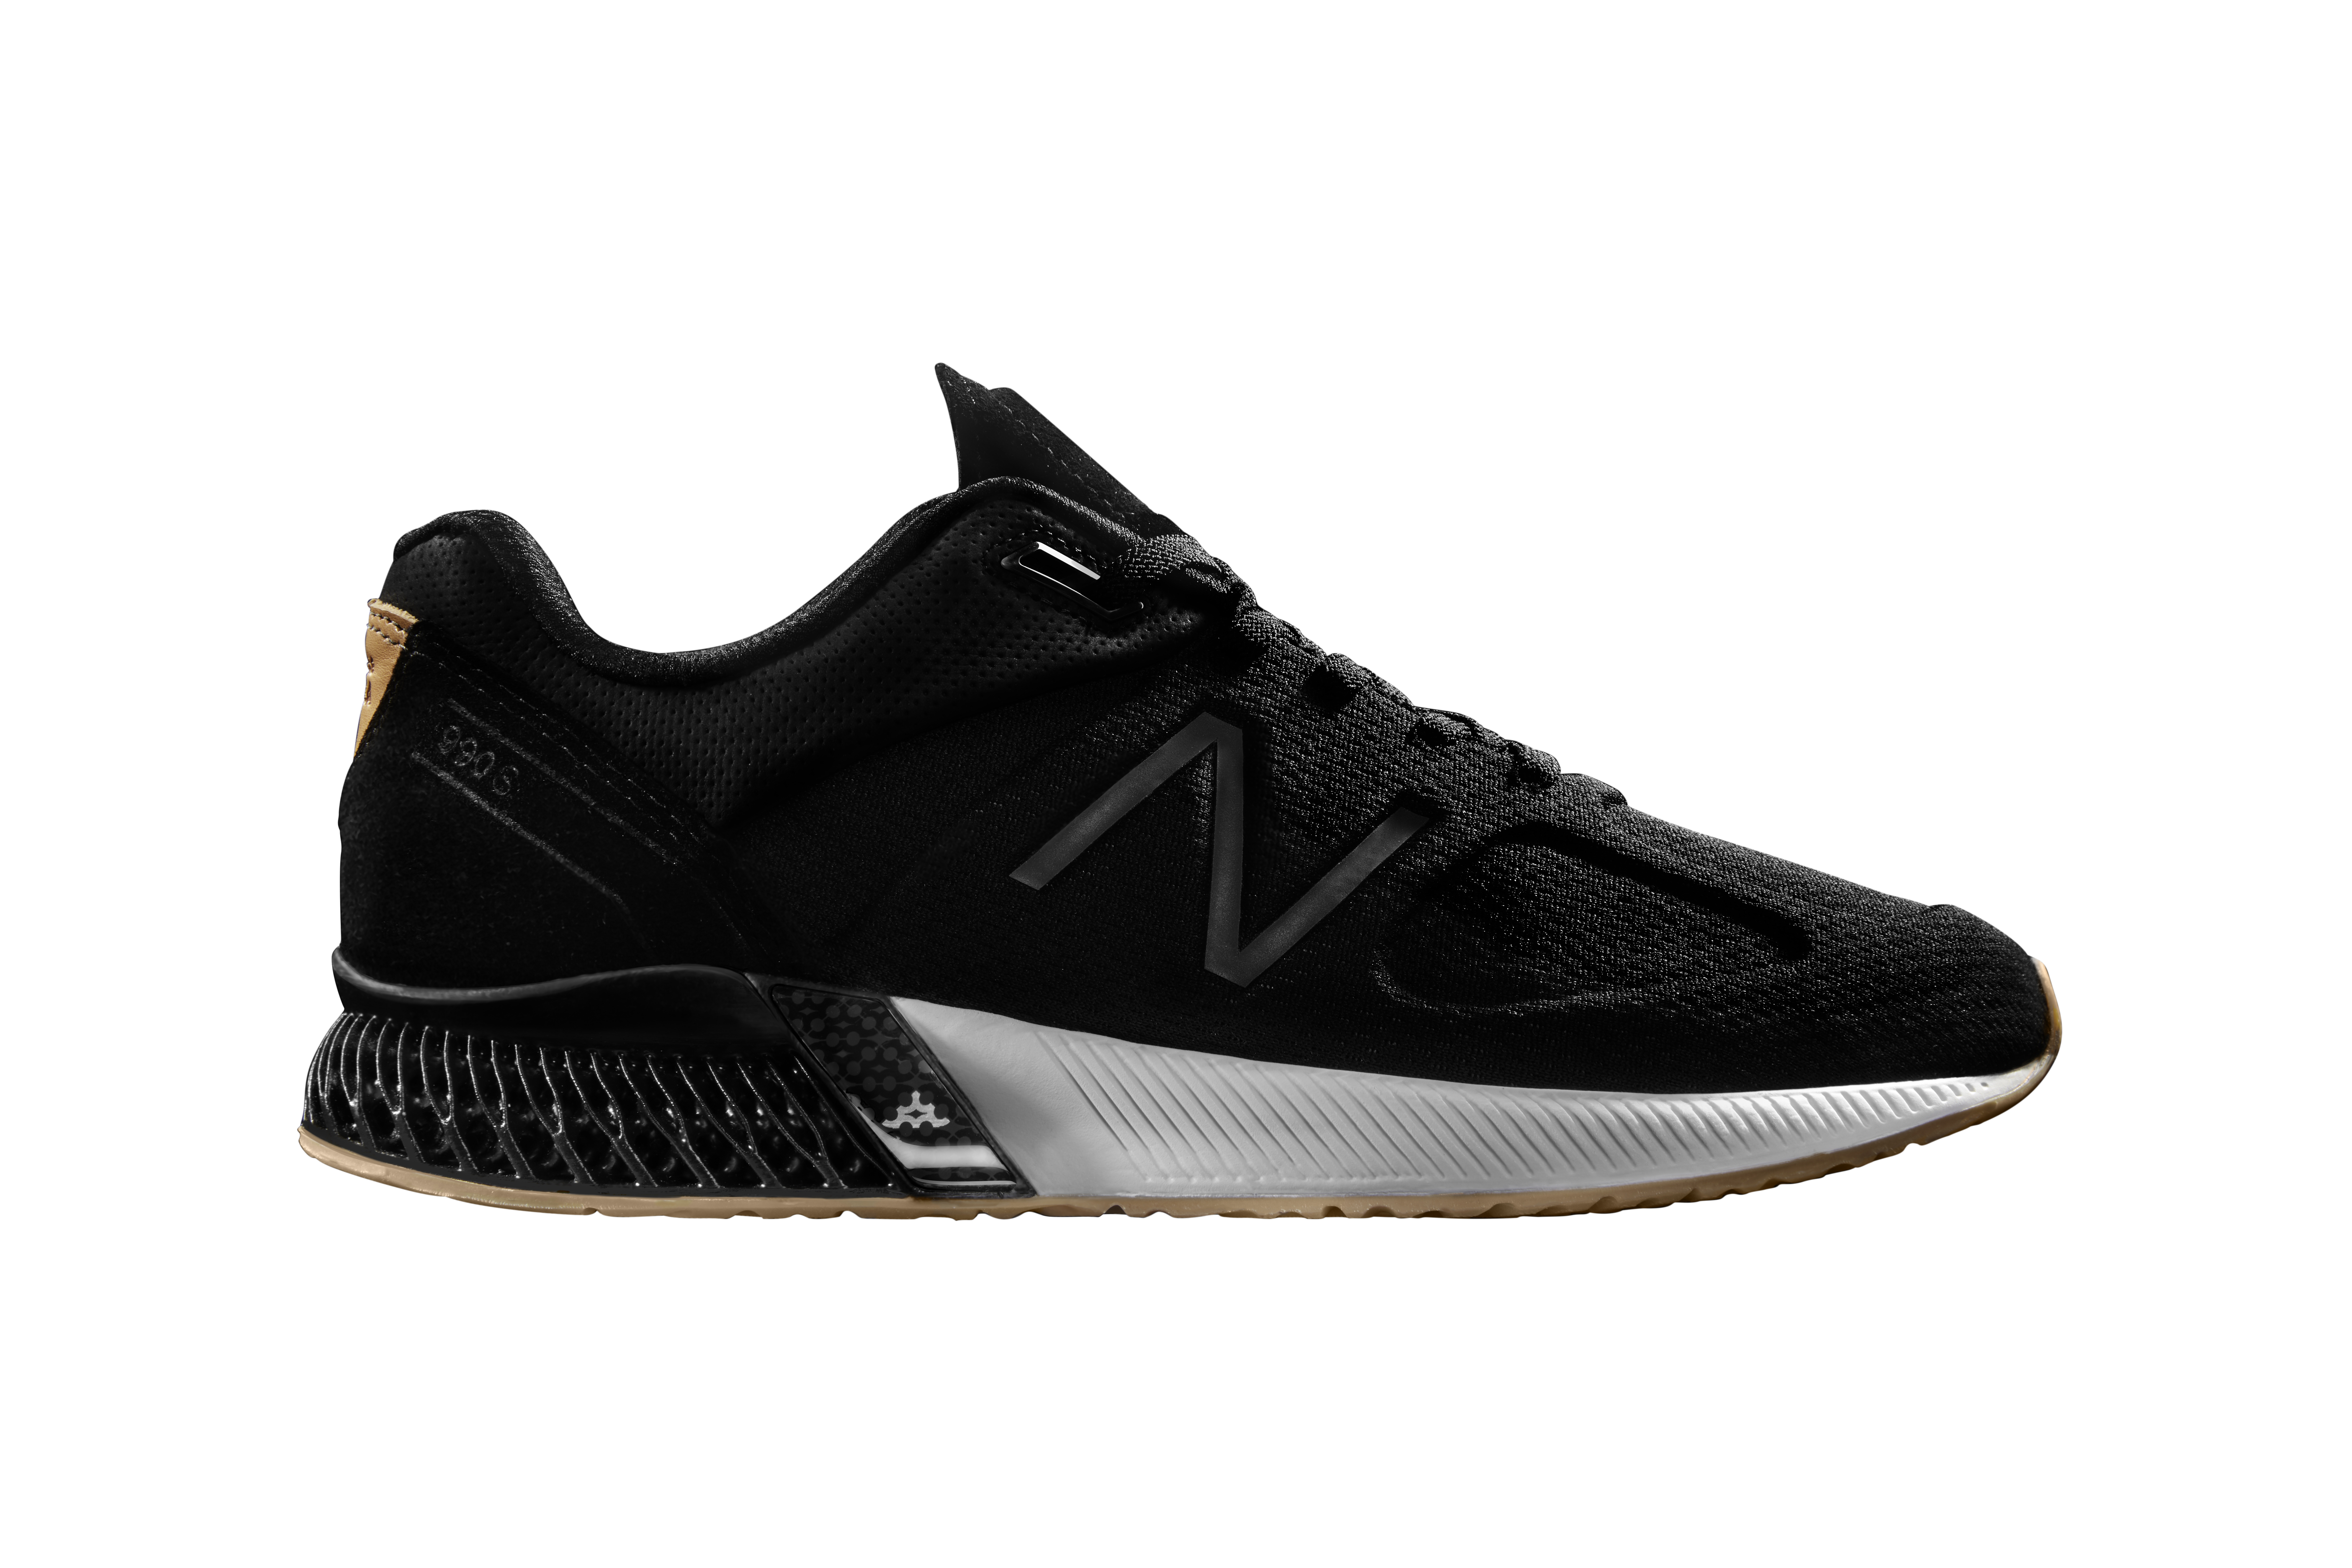 The reimagined New Balance 990 Sport with a 3D printed heel. Photo via New Balance.